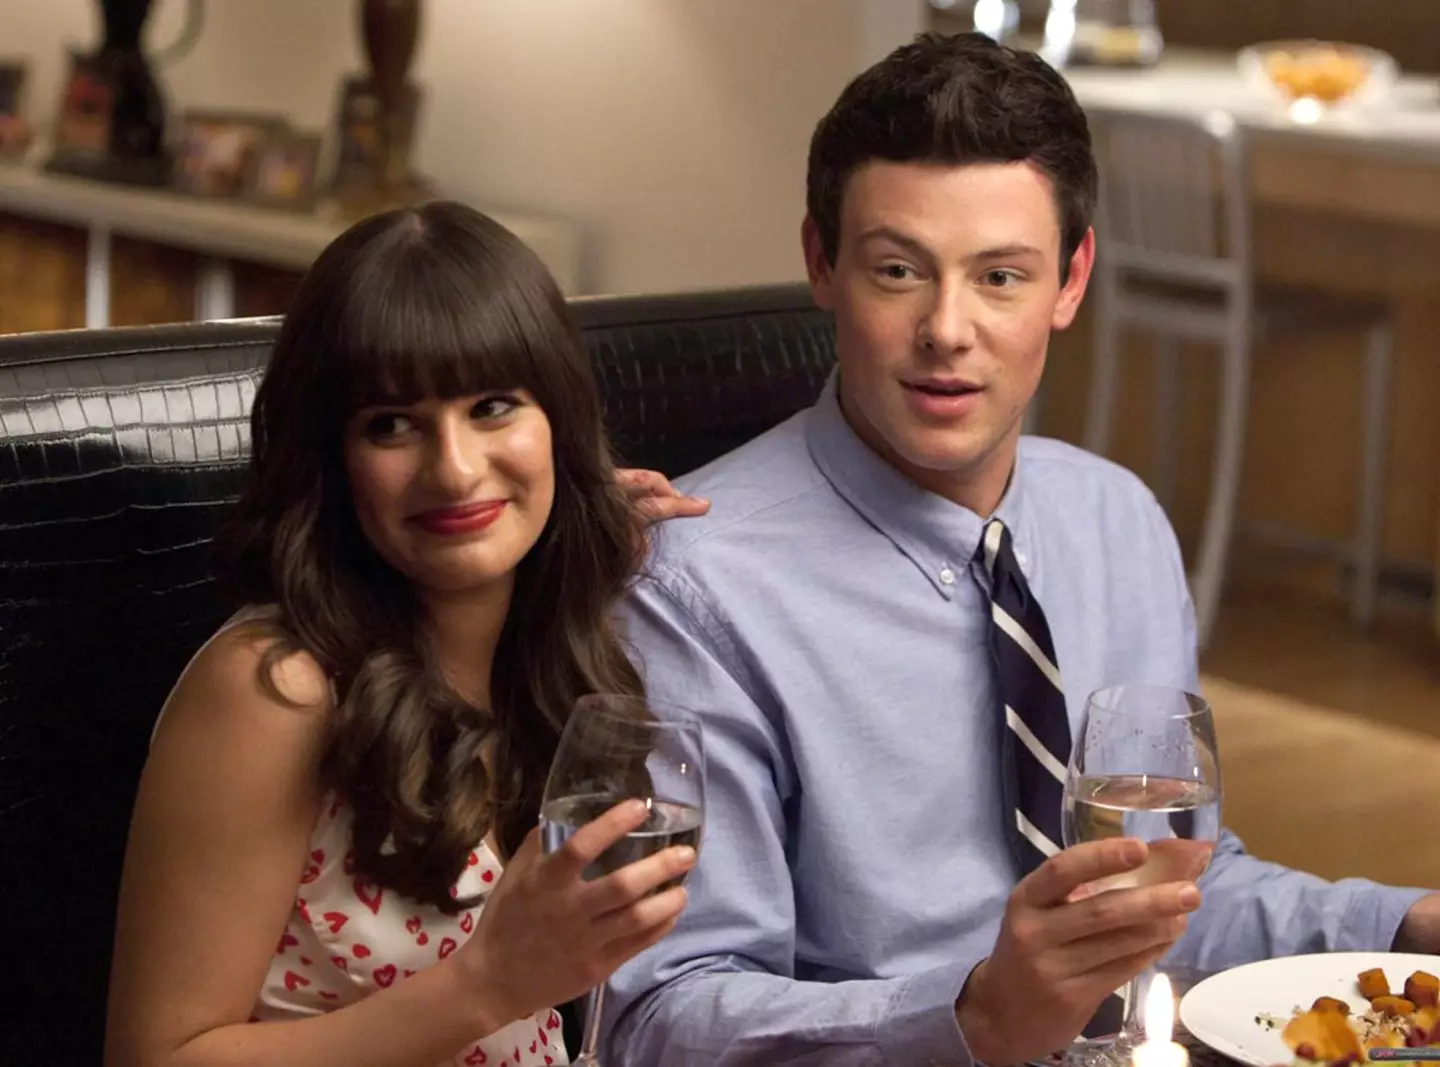 Cory Monteith and Lea Michele played Finn and Rachel in Glee.